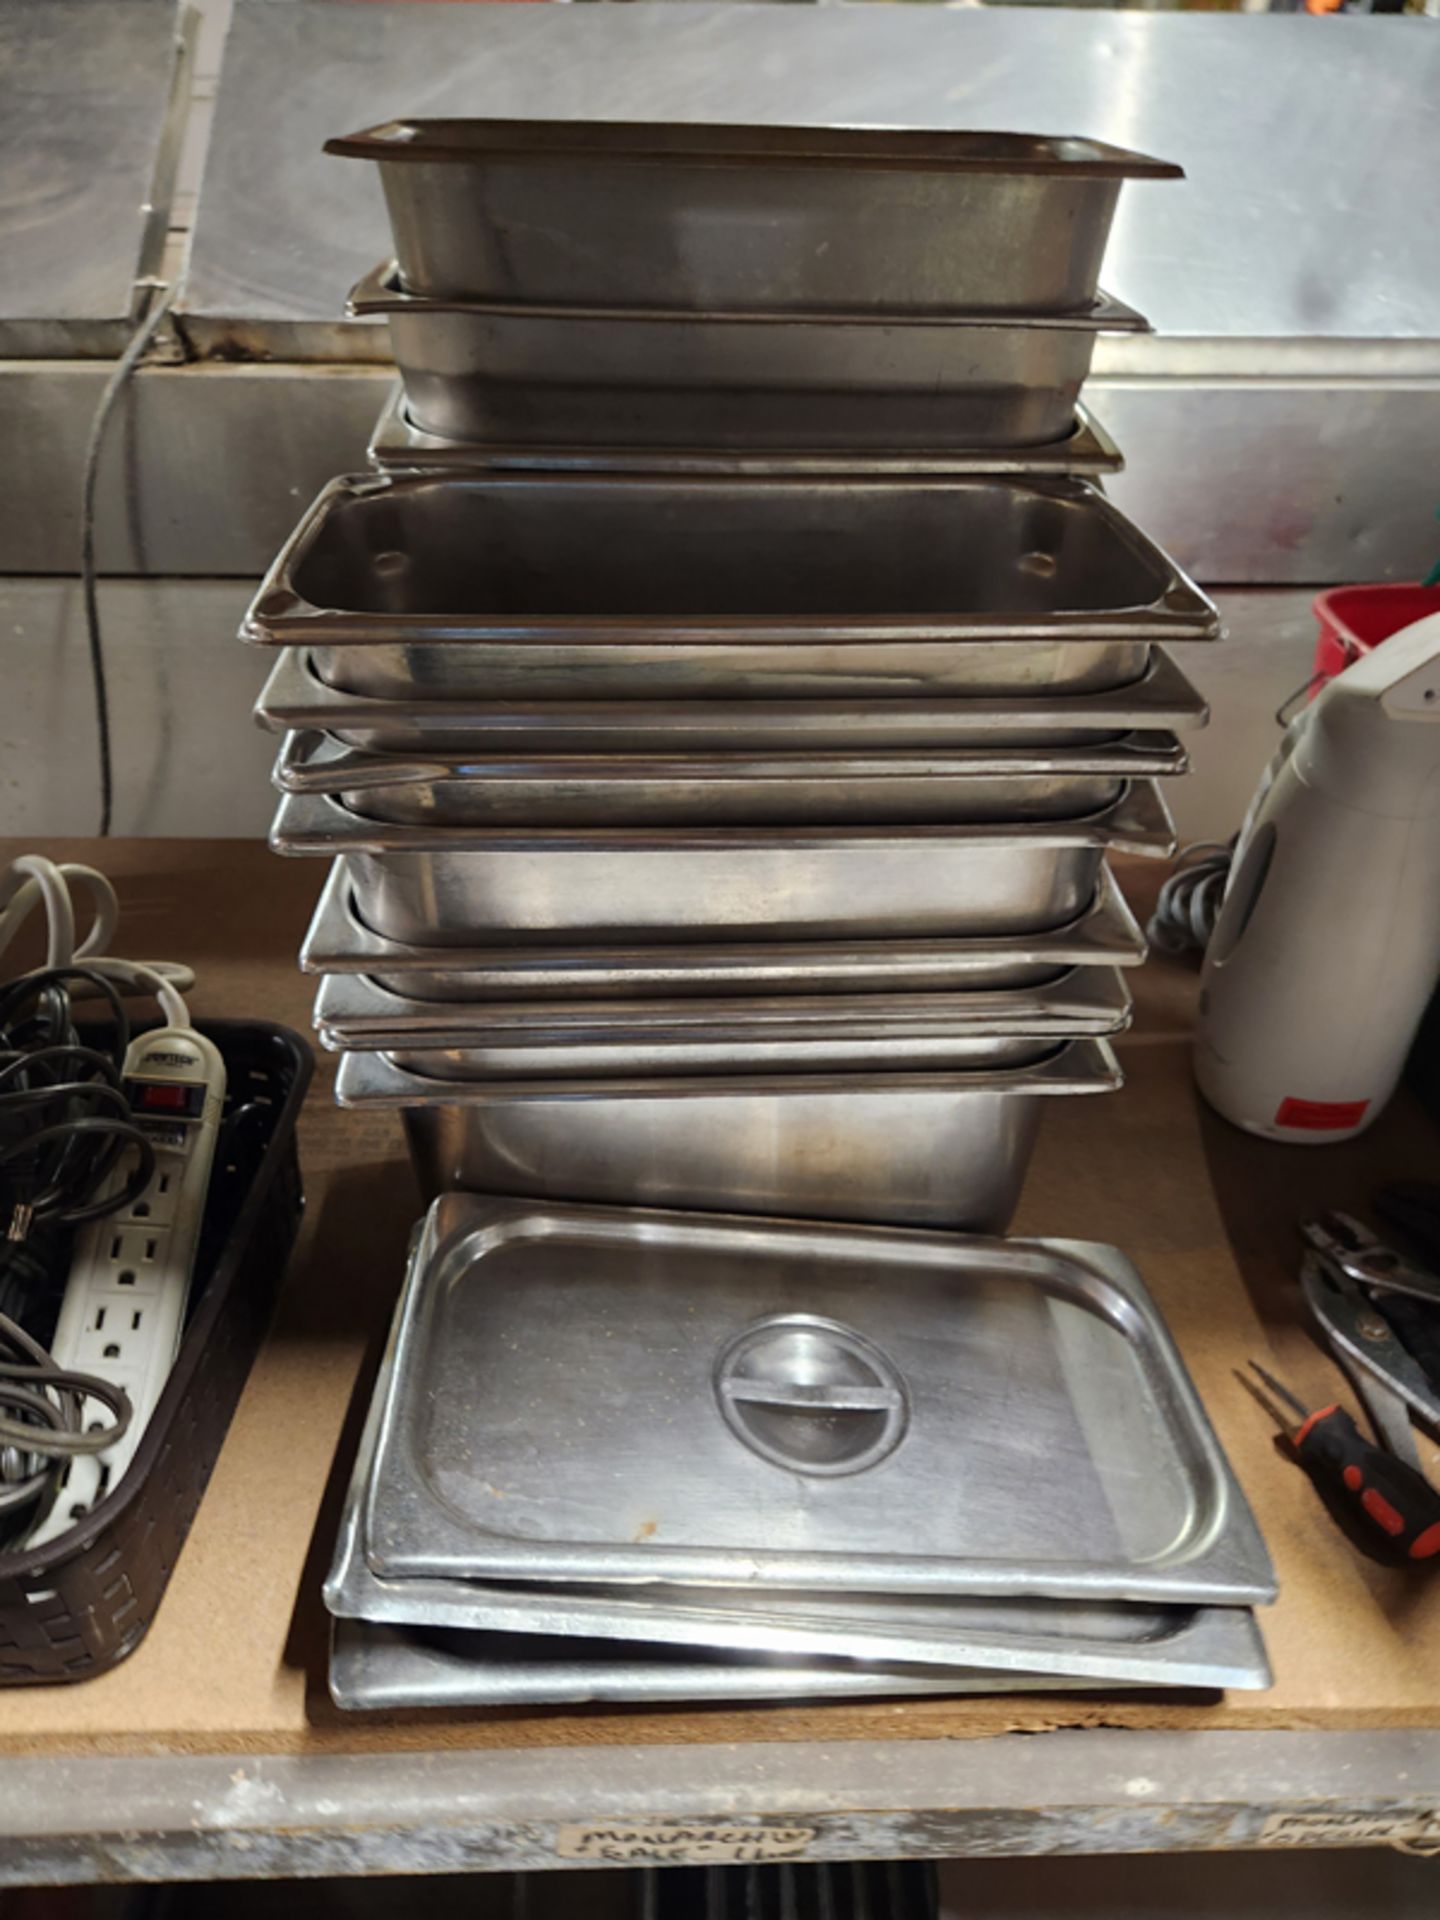 20 STAINLESS INSERT PANS WITH 4 LIDS